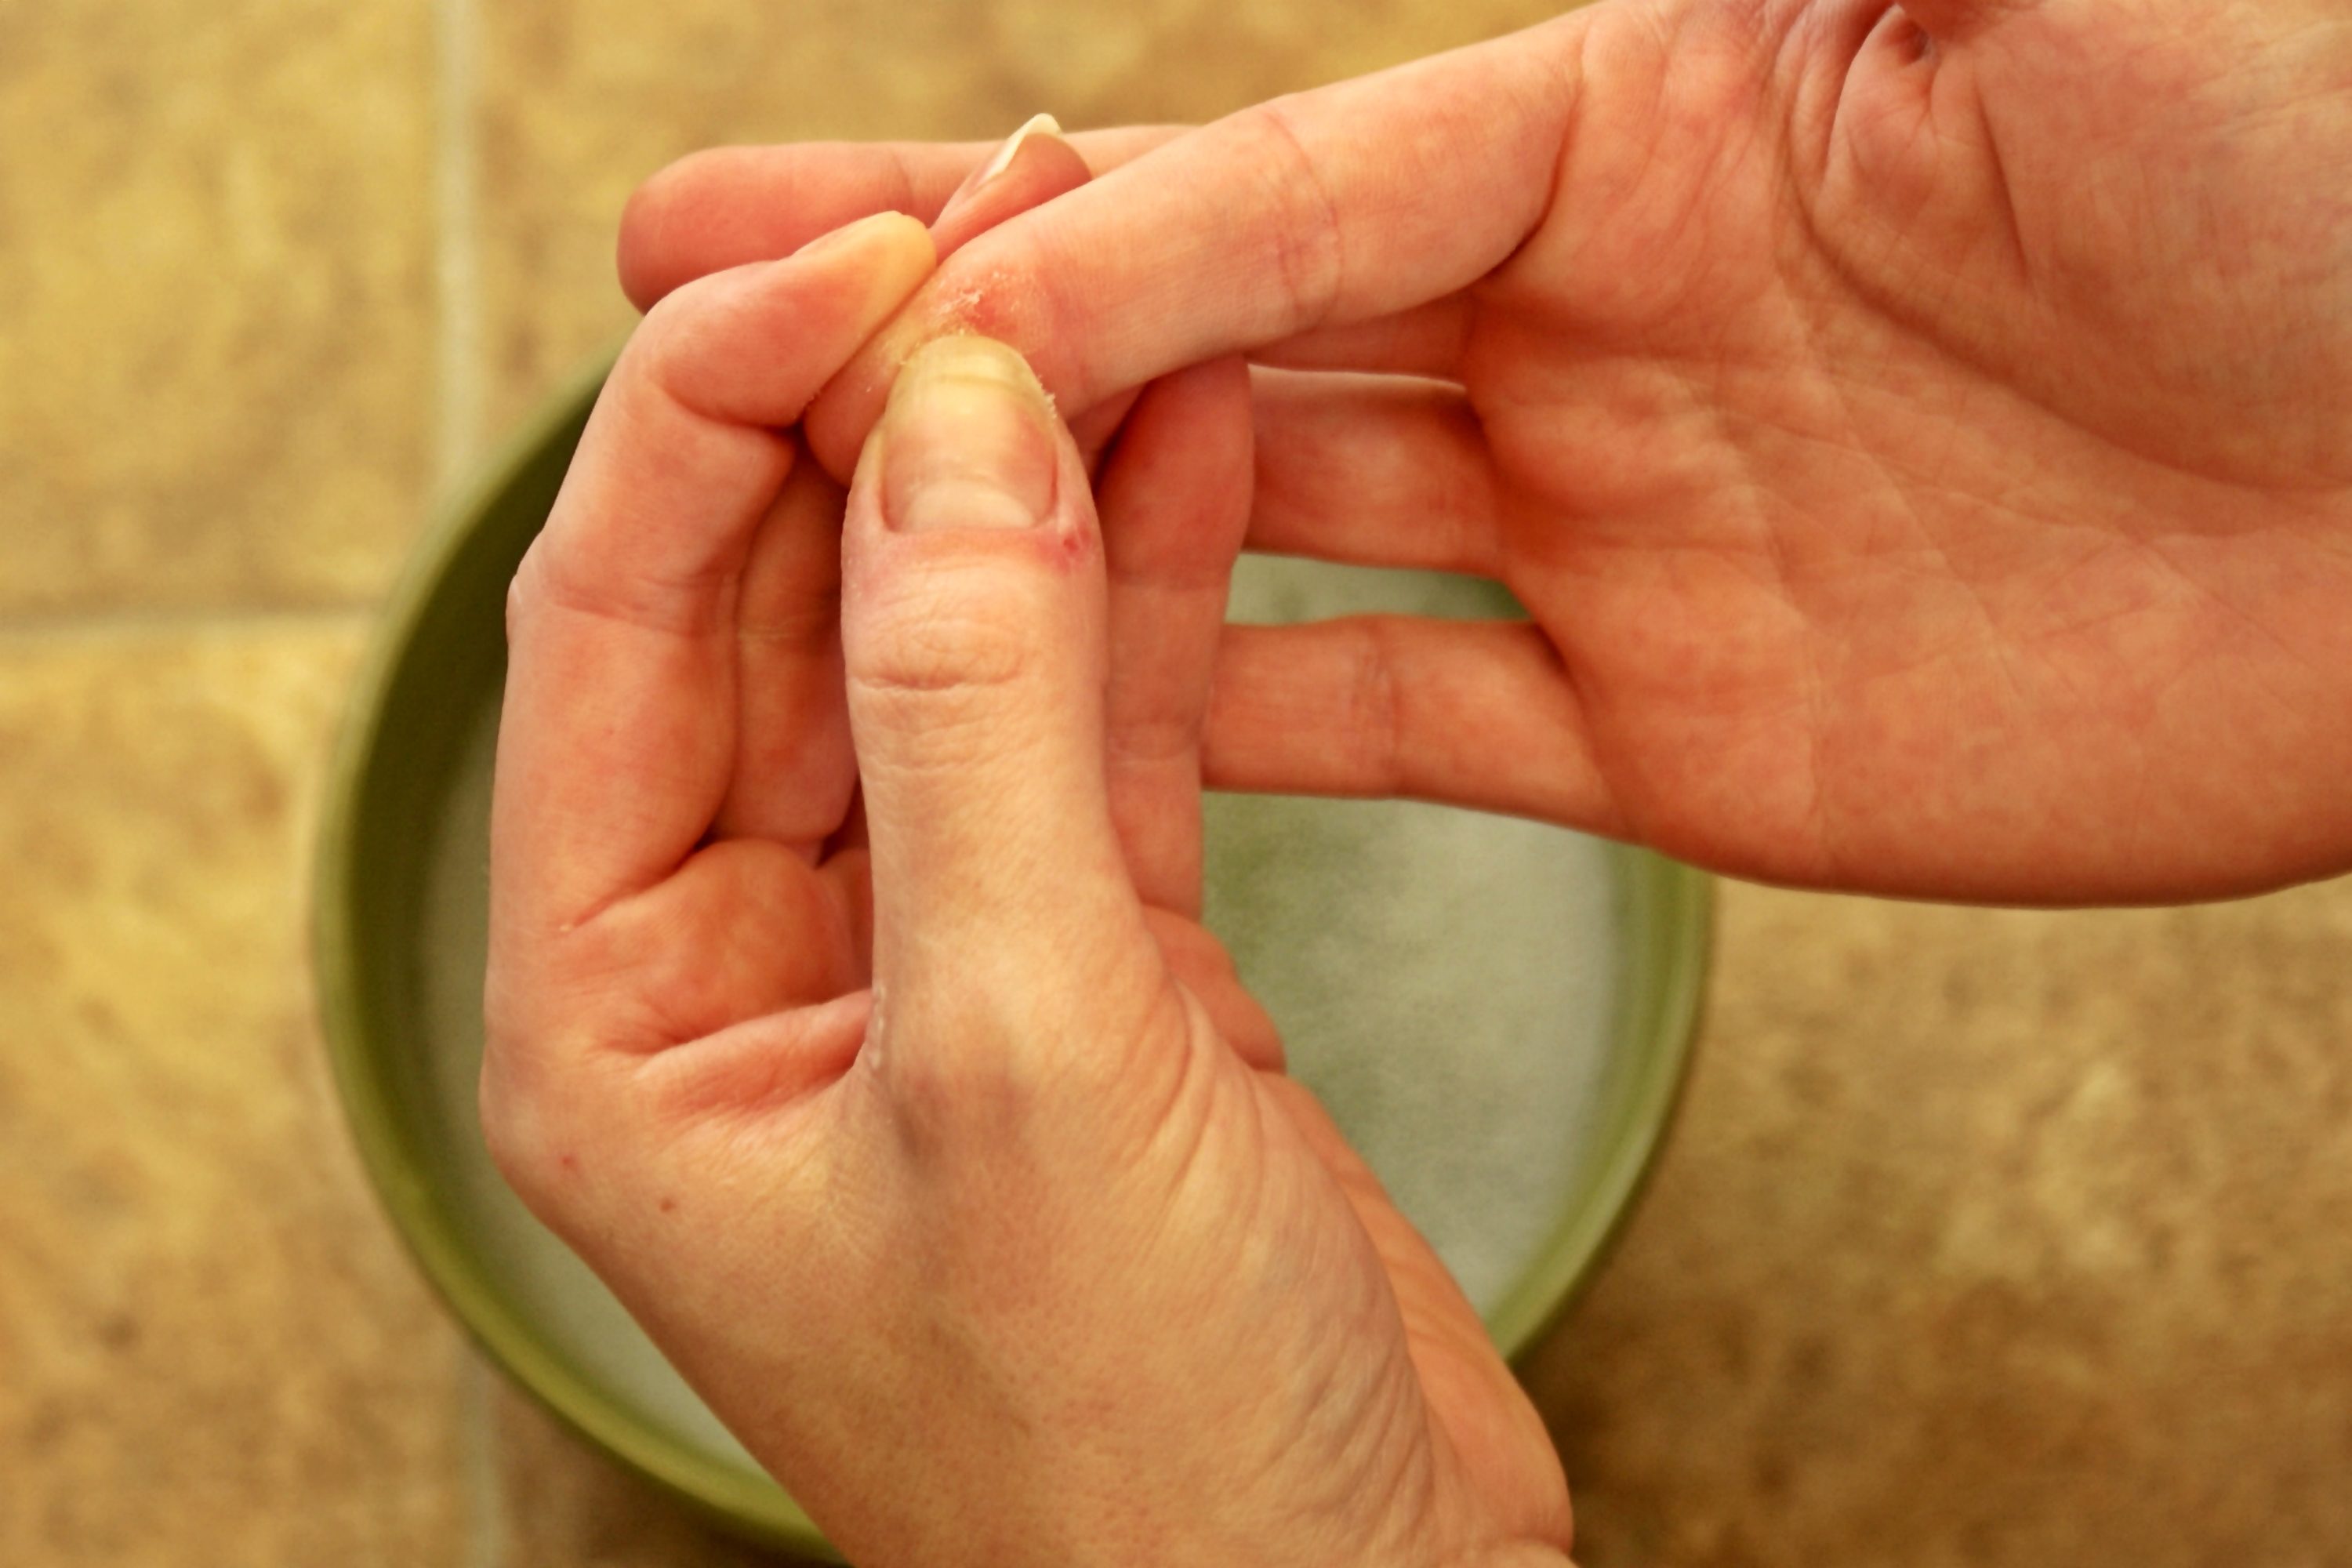 How To Remove The Moment Glue From The Hands Than To Wash At